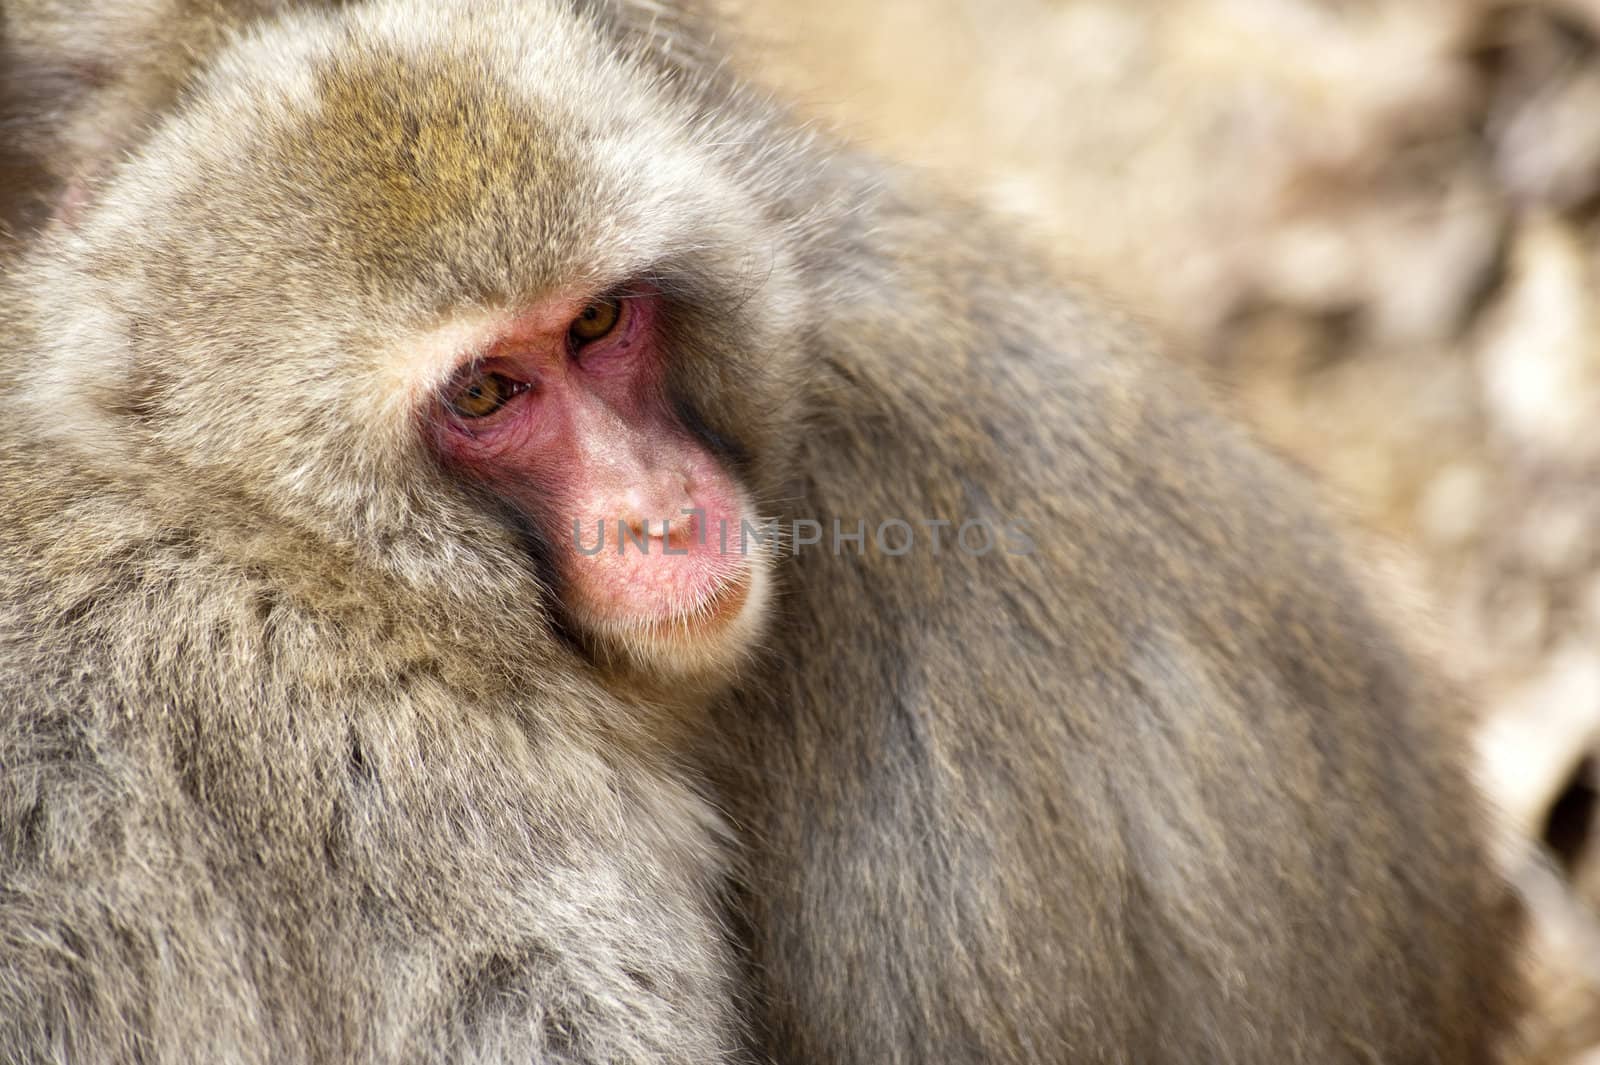 a pair of Japanese snow monkeys or Japanese Macaque huddled close together for warmth